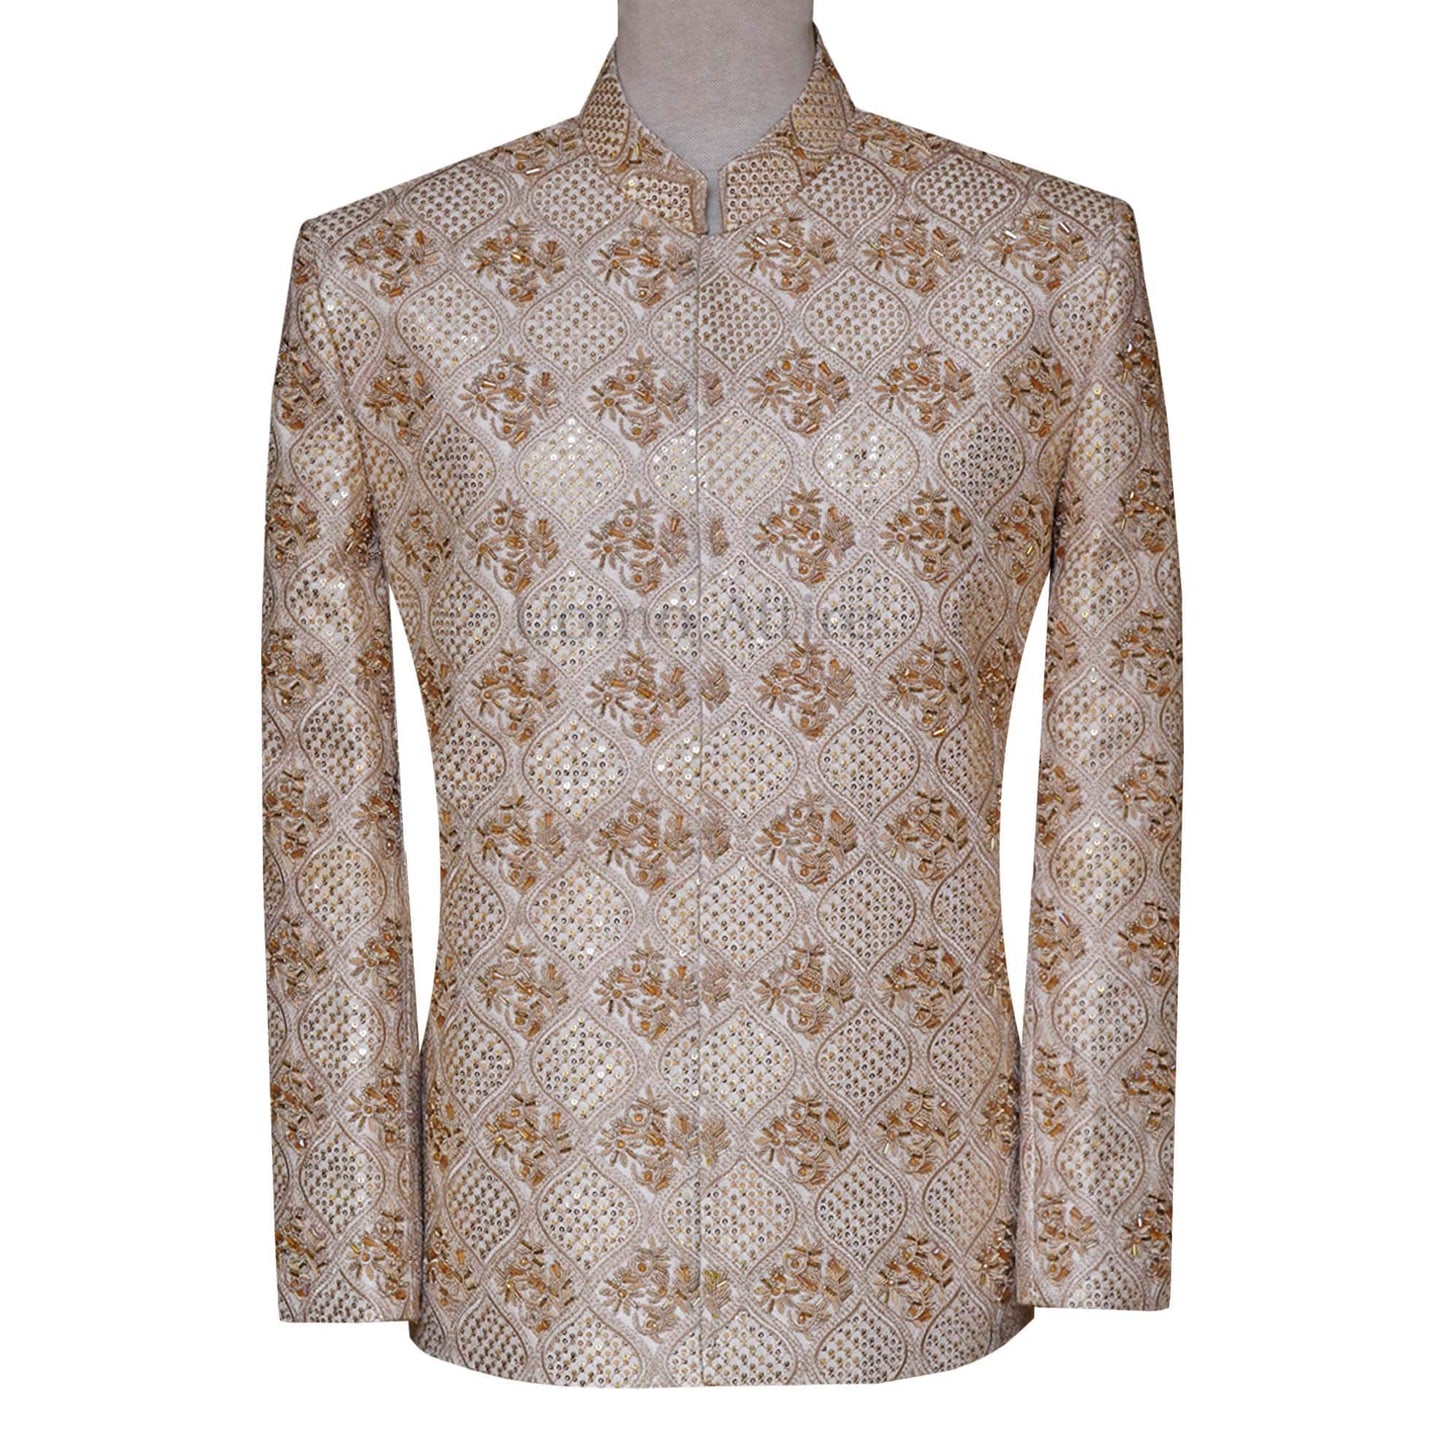 Fully embellished and embroidered golden prince coat